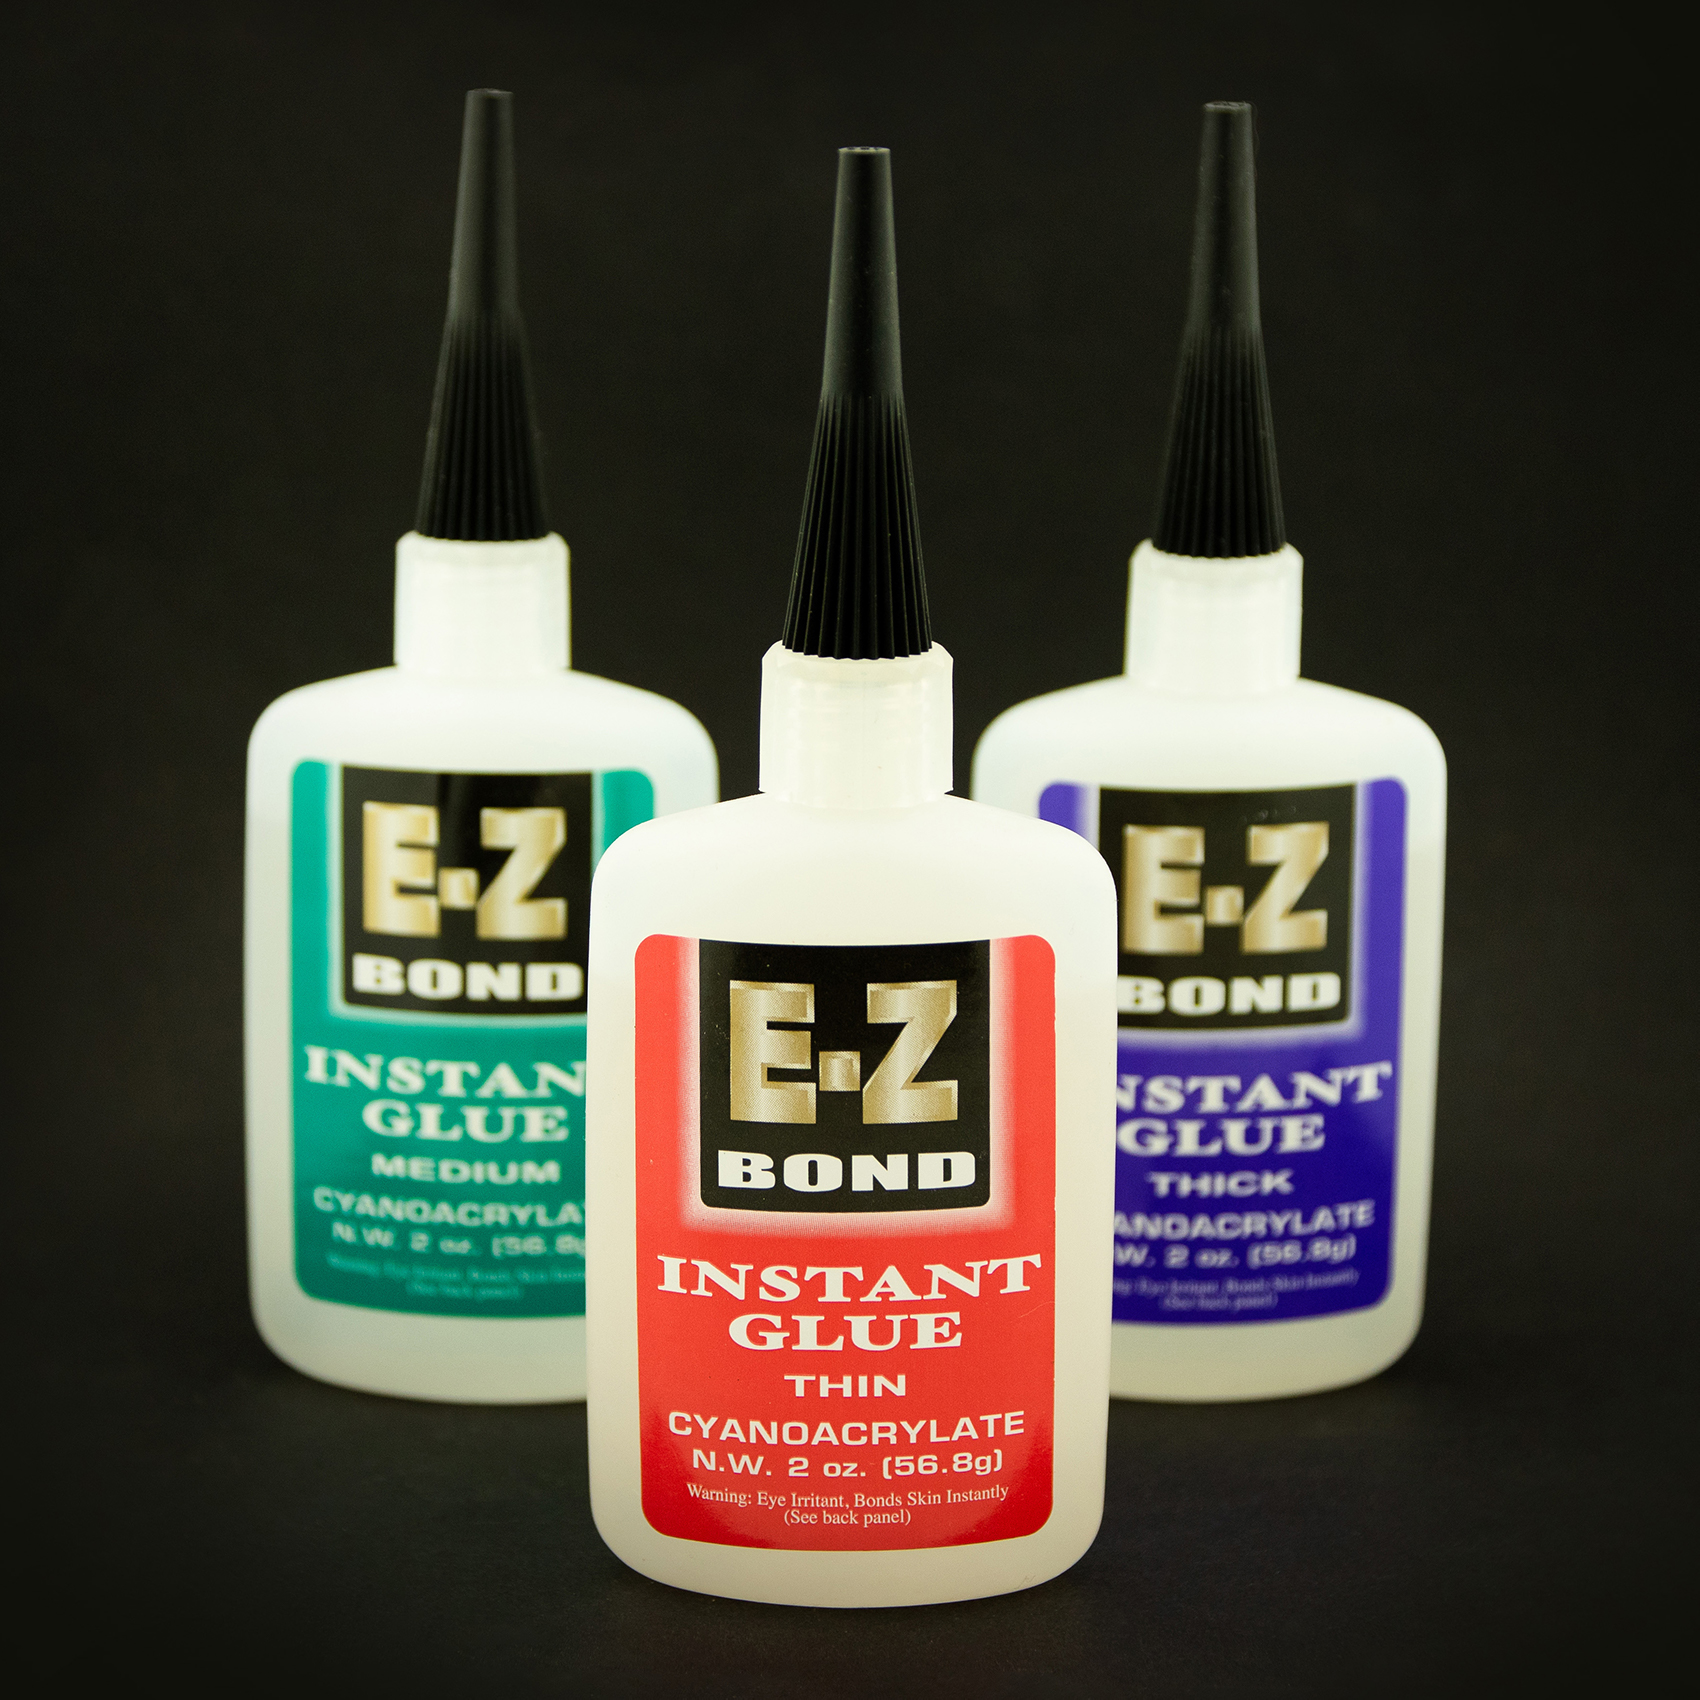 Three 2oz bottles of E-Z Bond CA Glue in thin, medium, and thick viscosities for pen turning, finishing and repairing